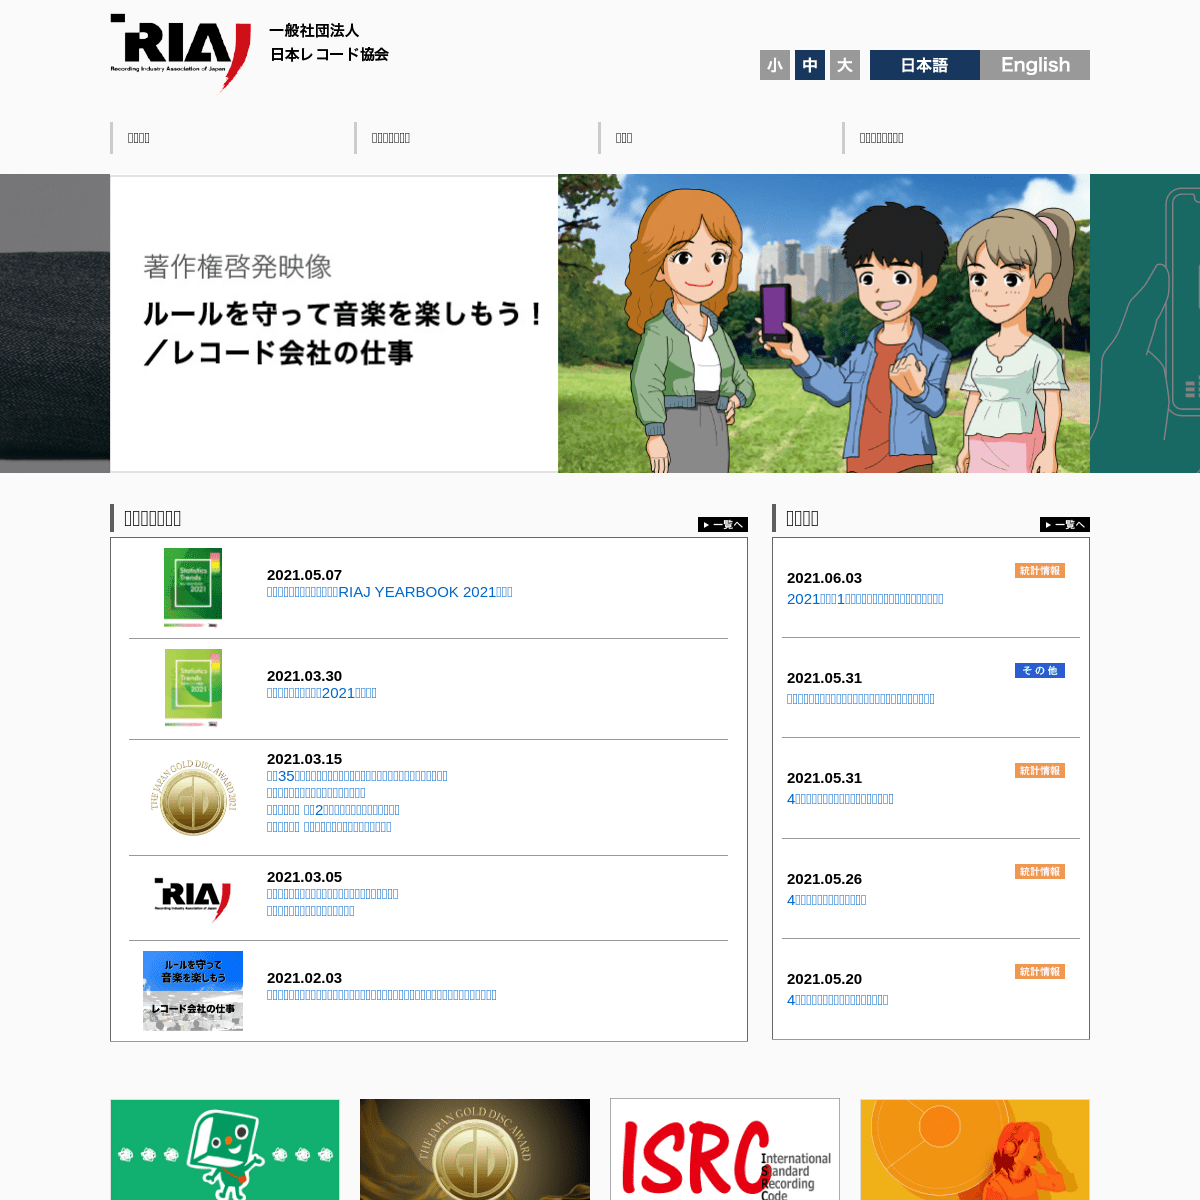 A complete backup of https://riaj.or.jp